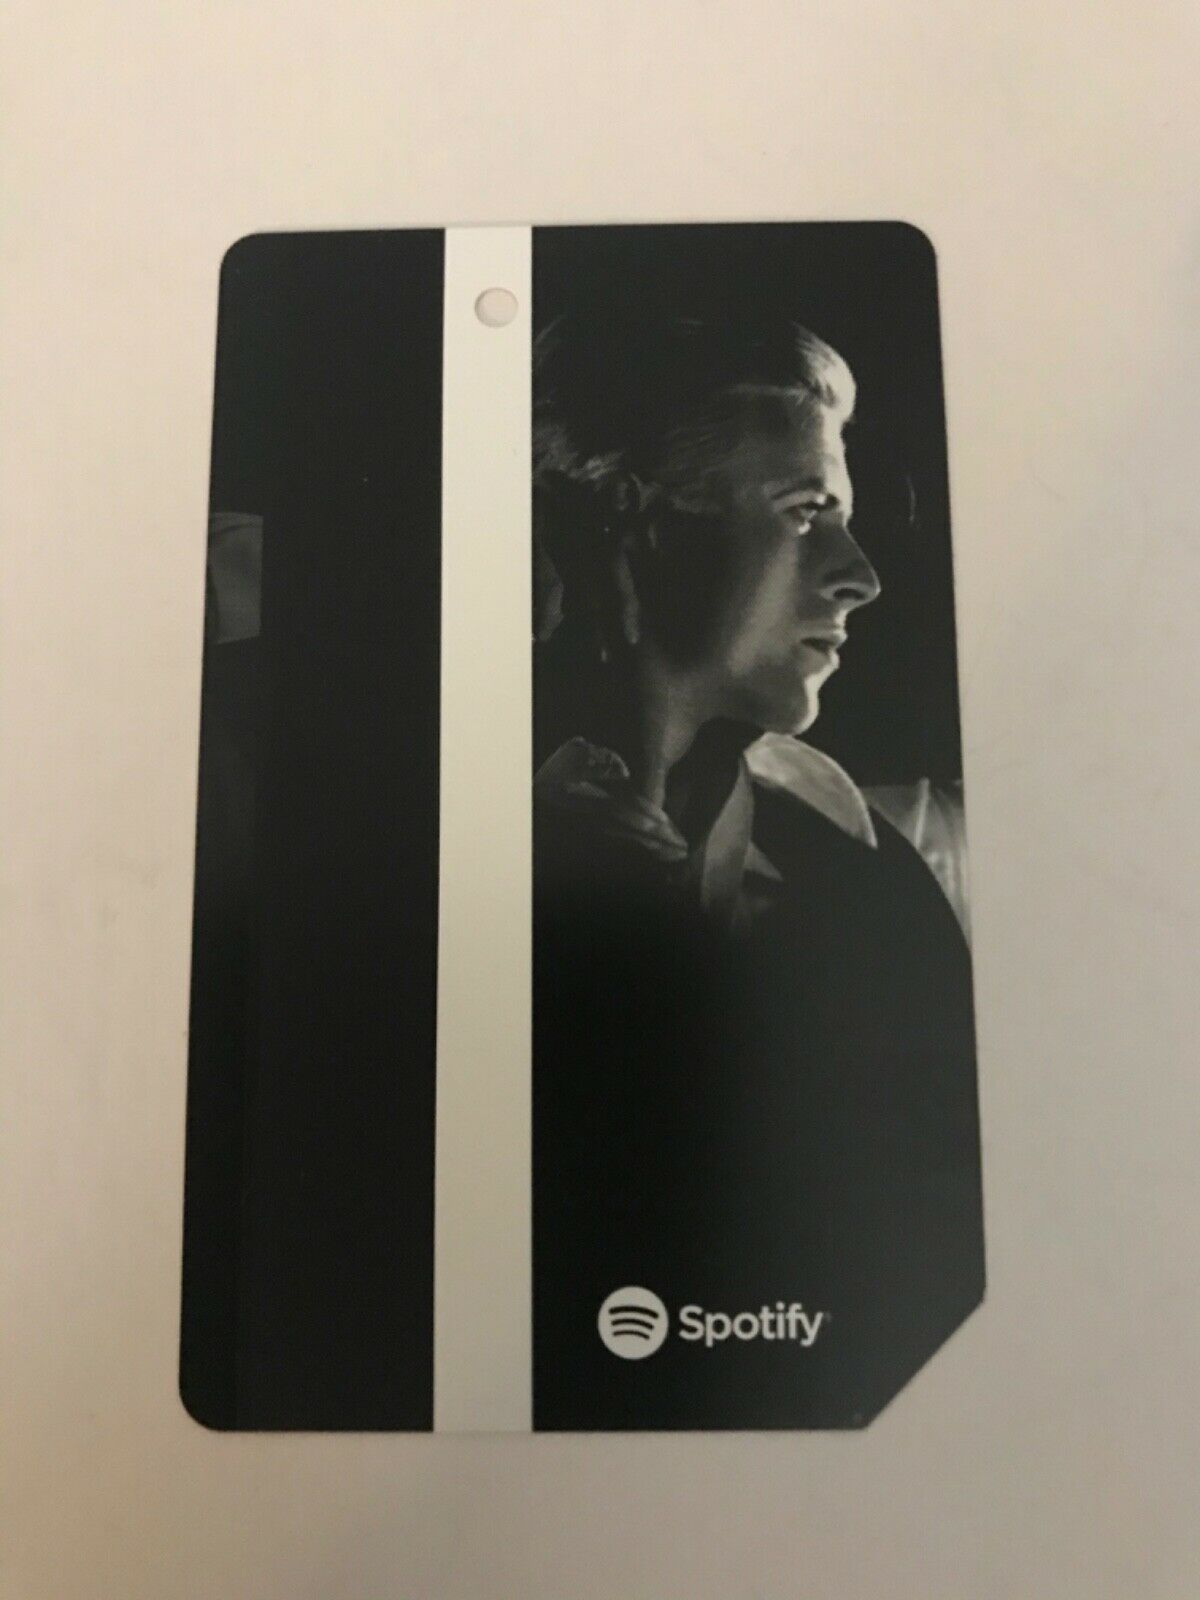 David Bowie Mta Metro Card From 2019 - Bowie Profile